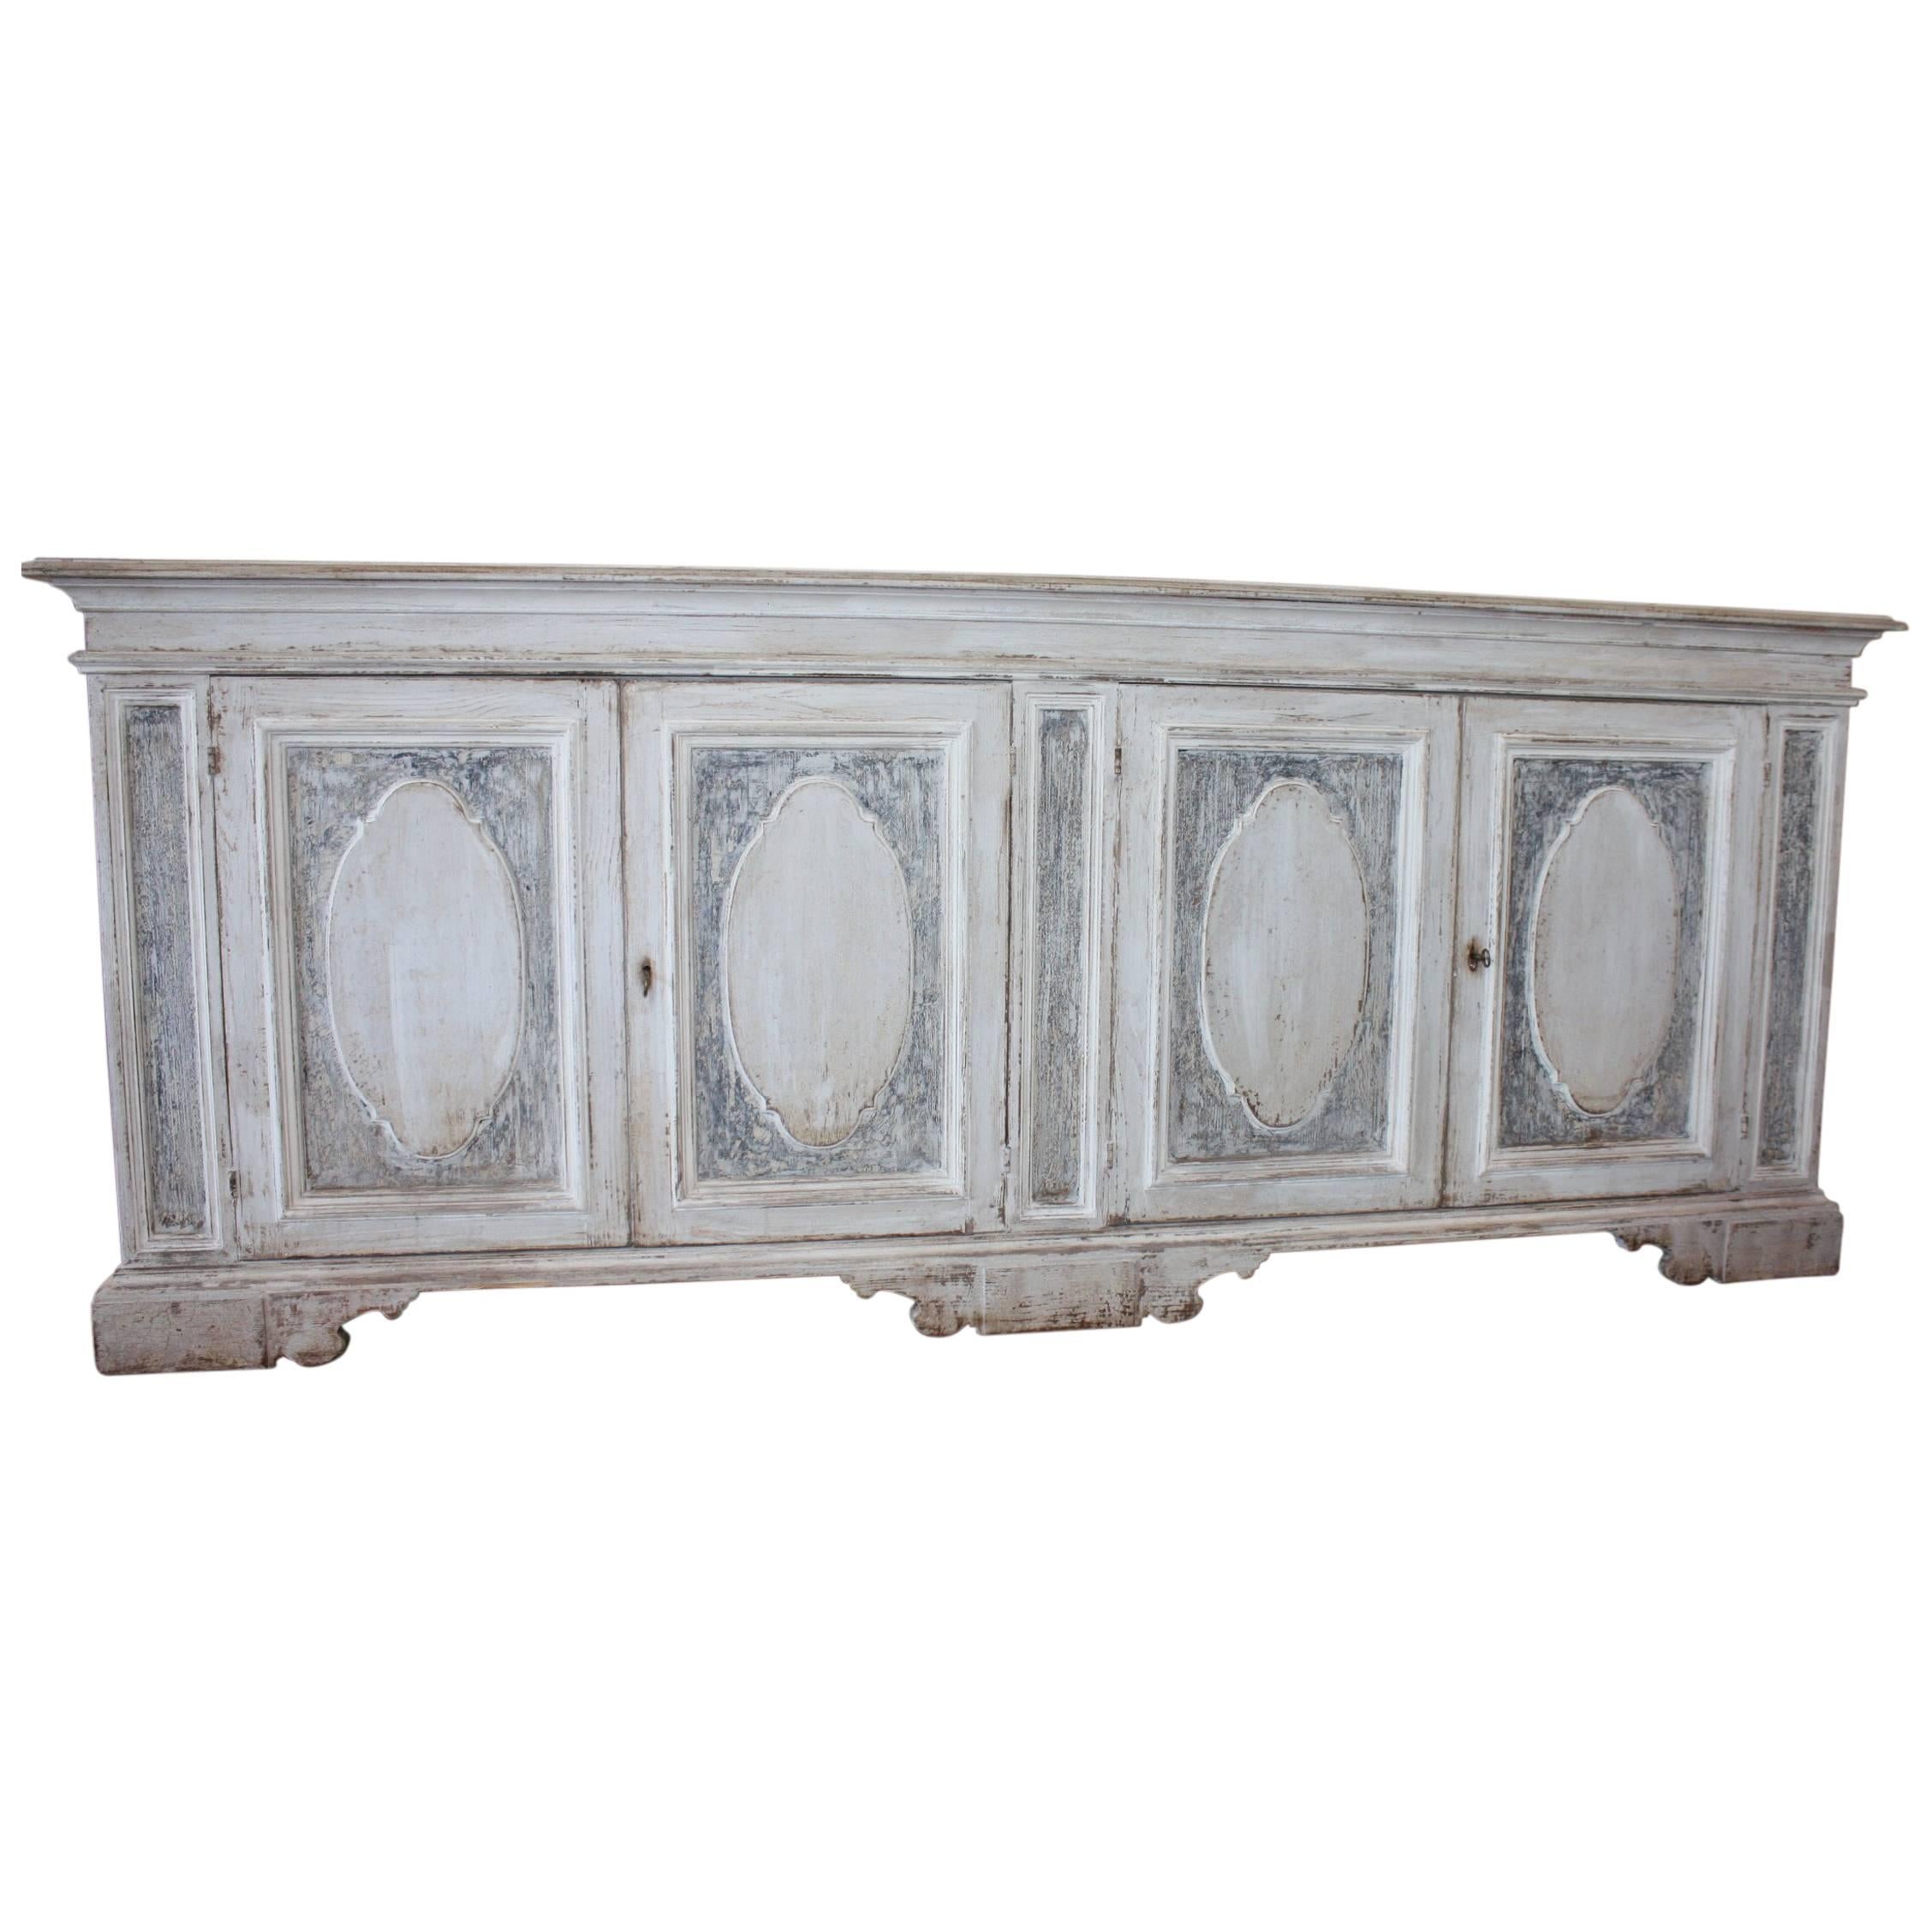 Impressive Painted Italian Buffet, Credenza or Sideboard